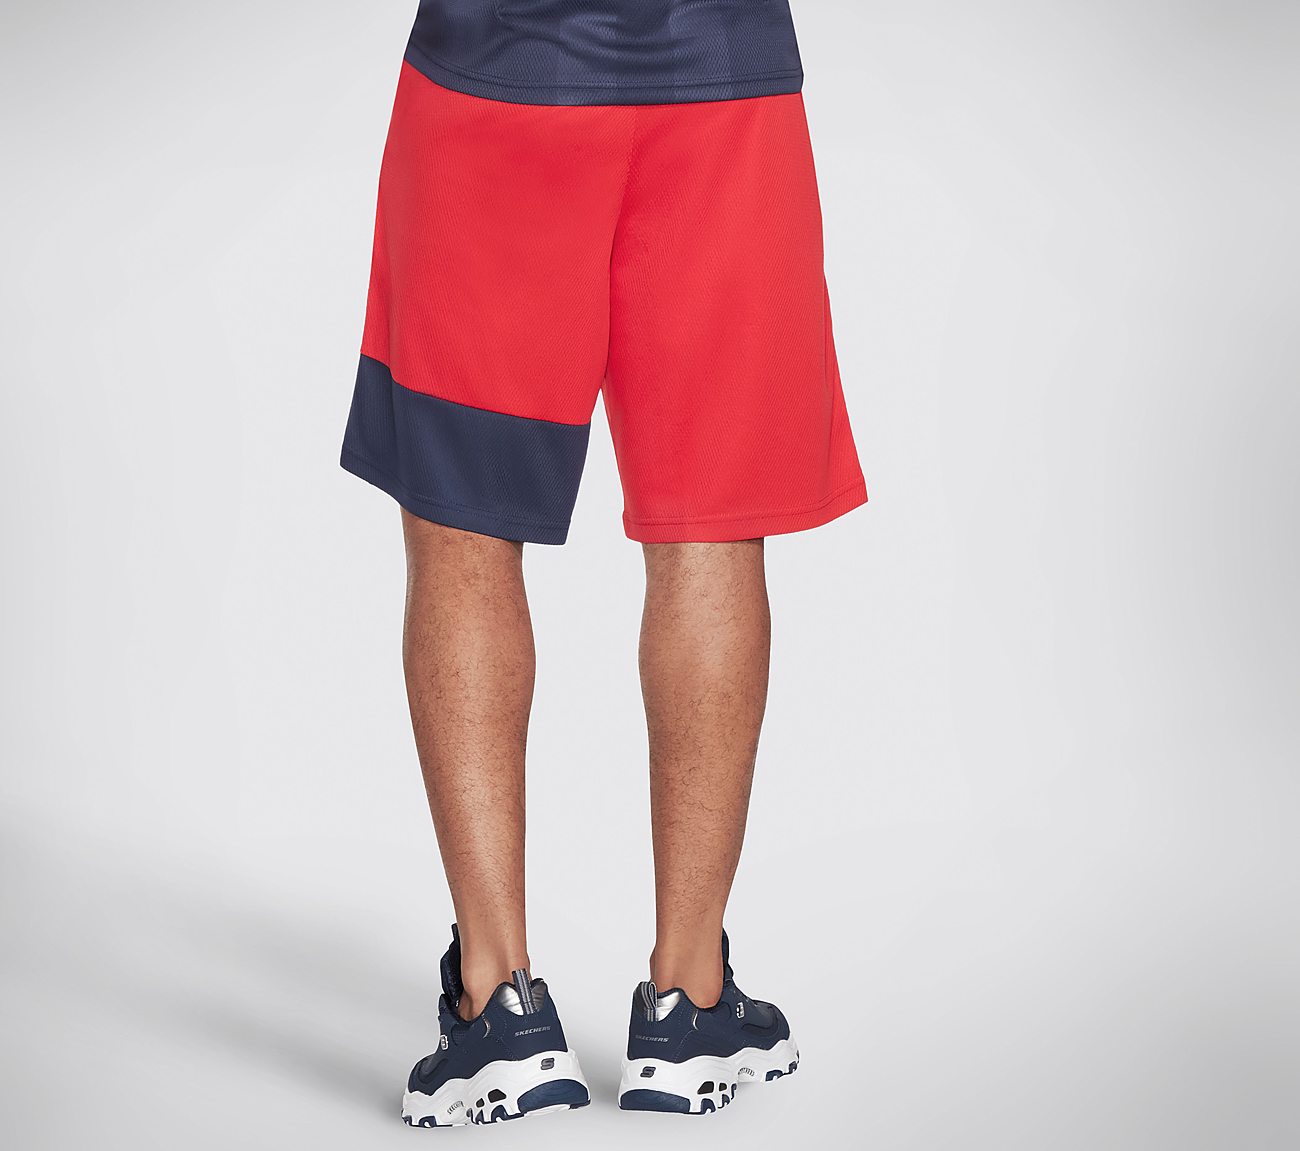 skechers shorts red